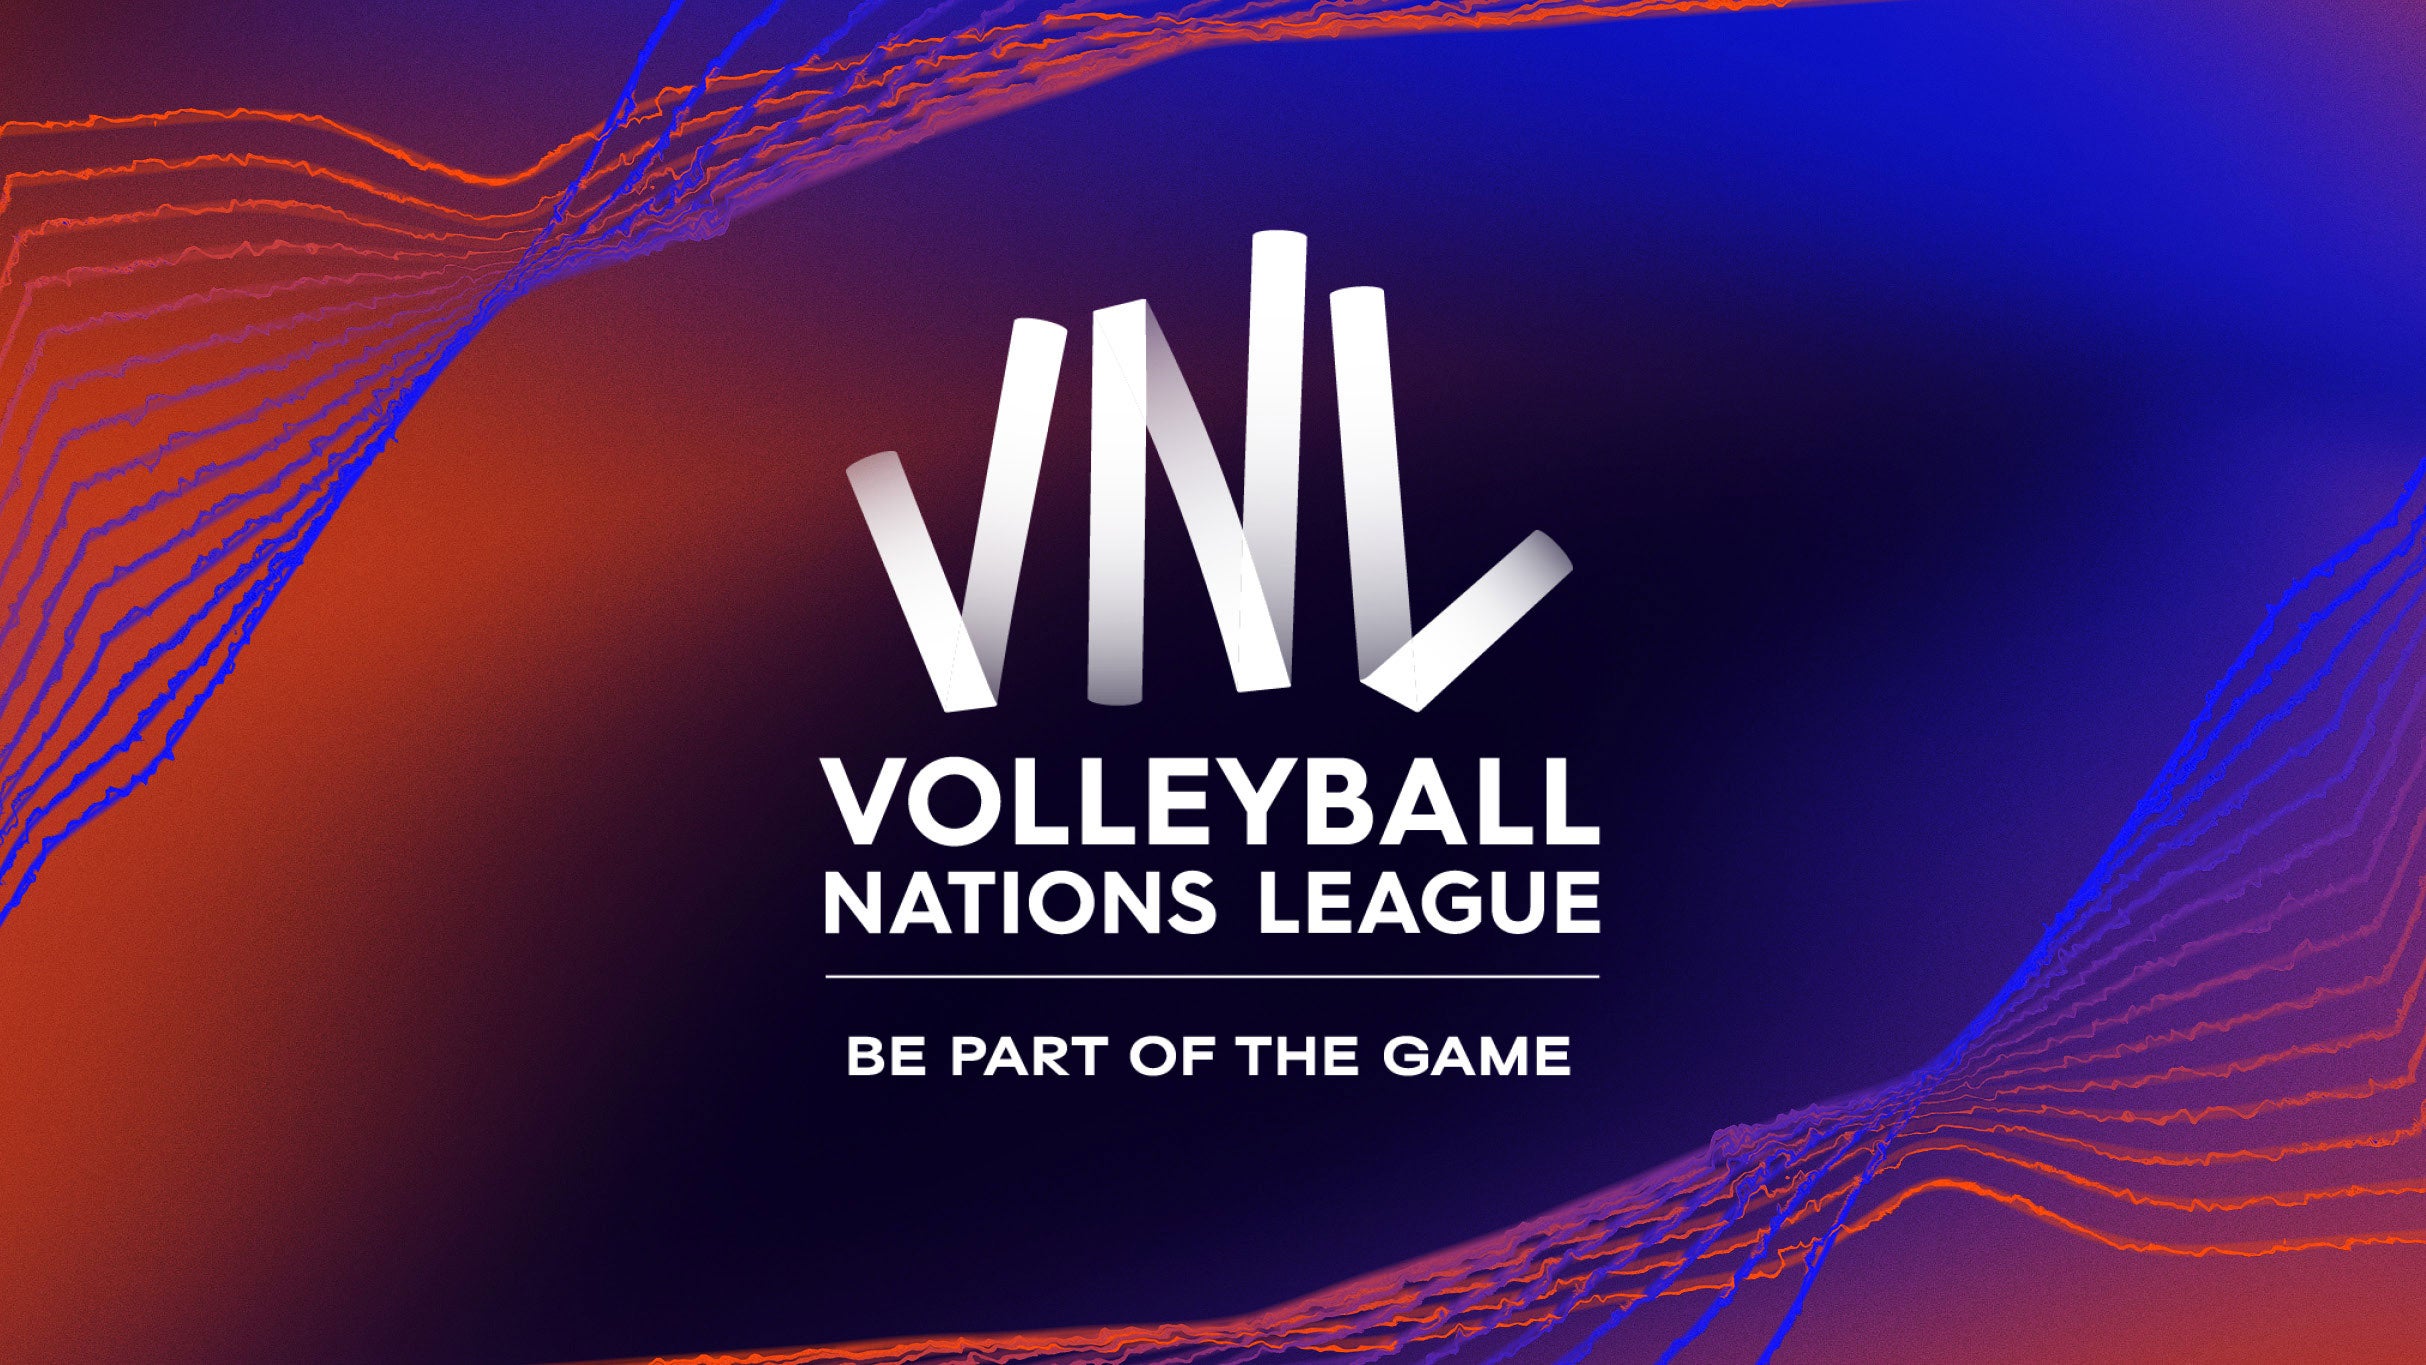 Volleyball Nations League - Match Day 5 presales in Ottawa